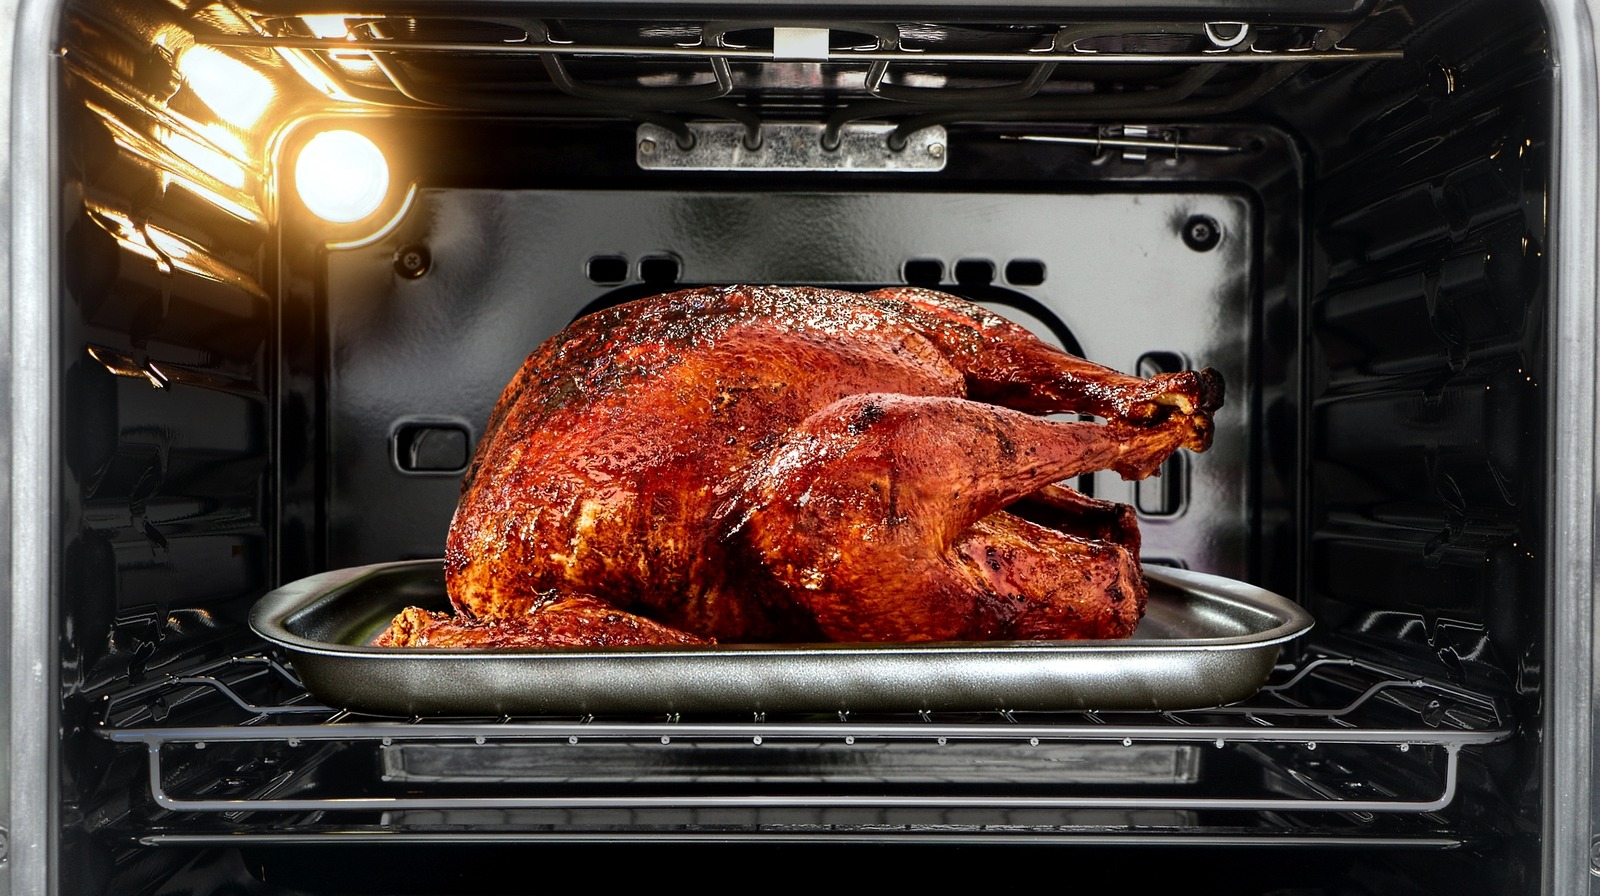 https://www.mashed.com/img/gallery/forgot-a-thanksgiving-roasting-rack-use-aluminum-foil/l-intro-1667285888.jpg